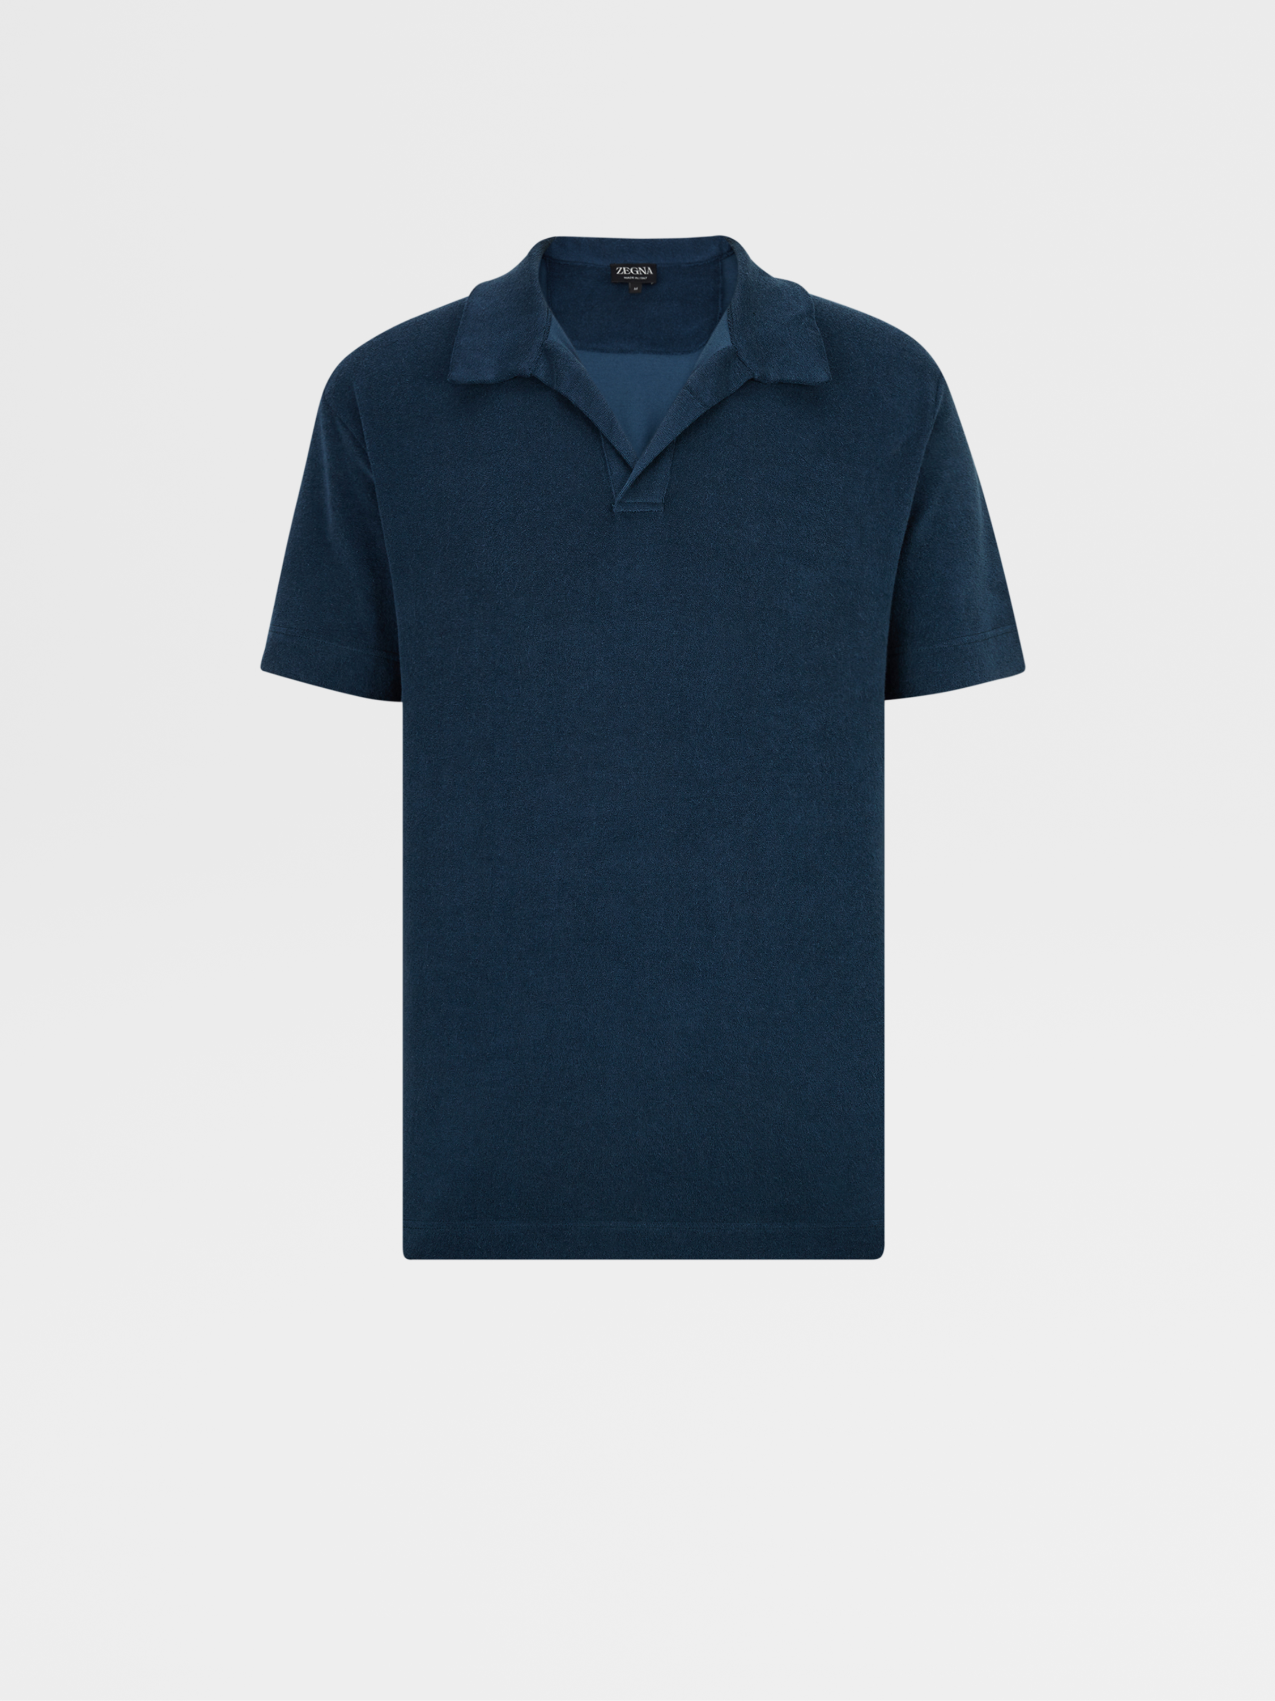 Blue Cotton and Lyocell Blend Short-sleeve Polo